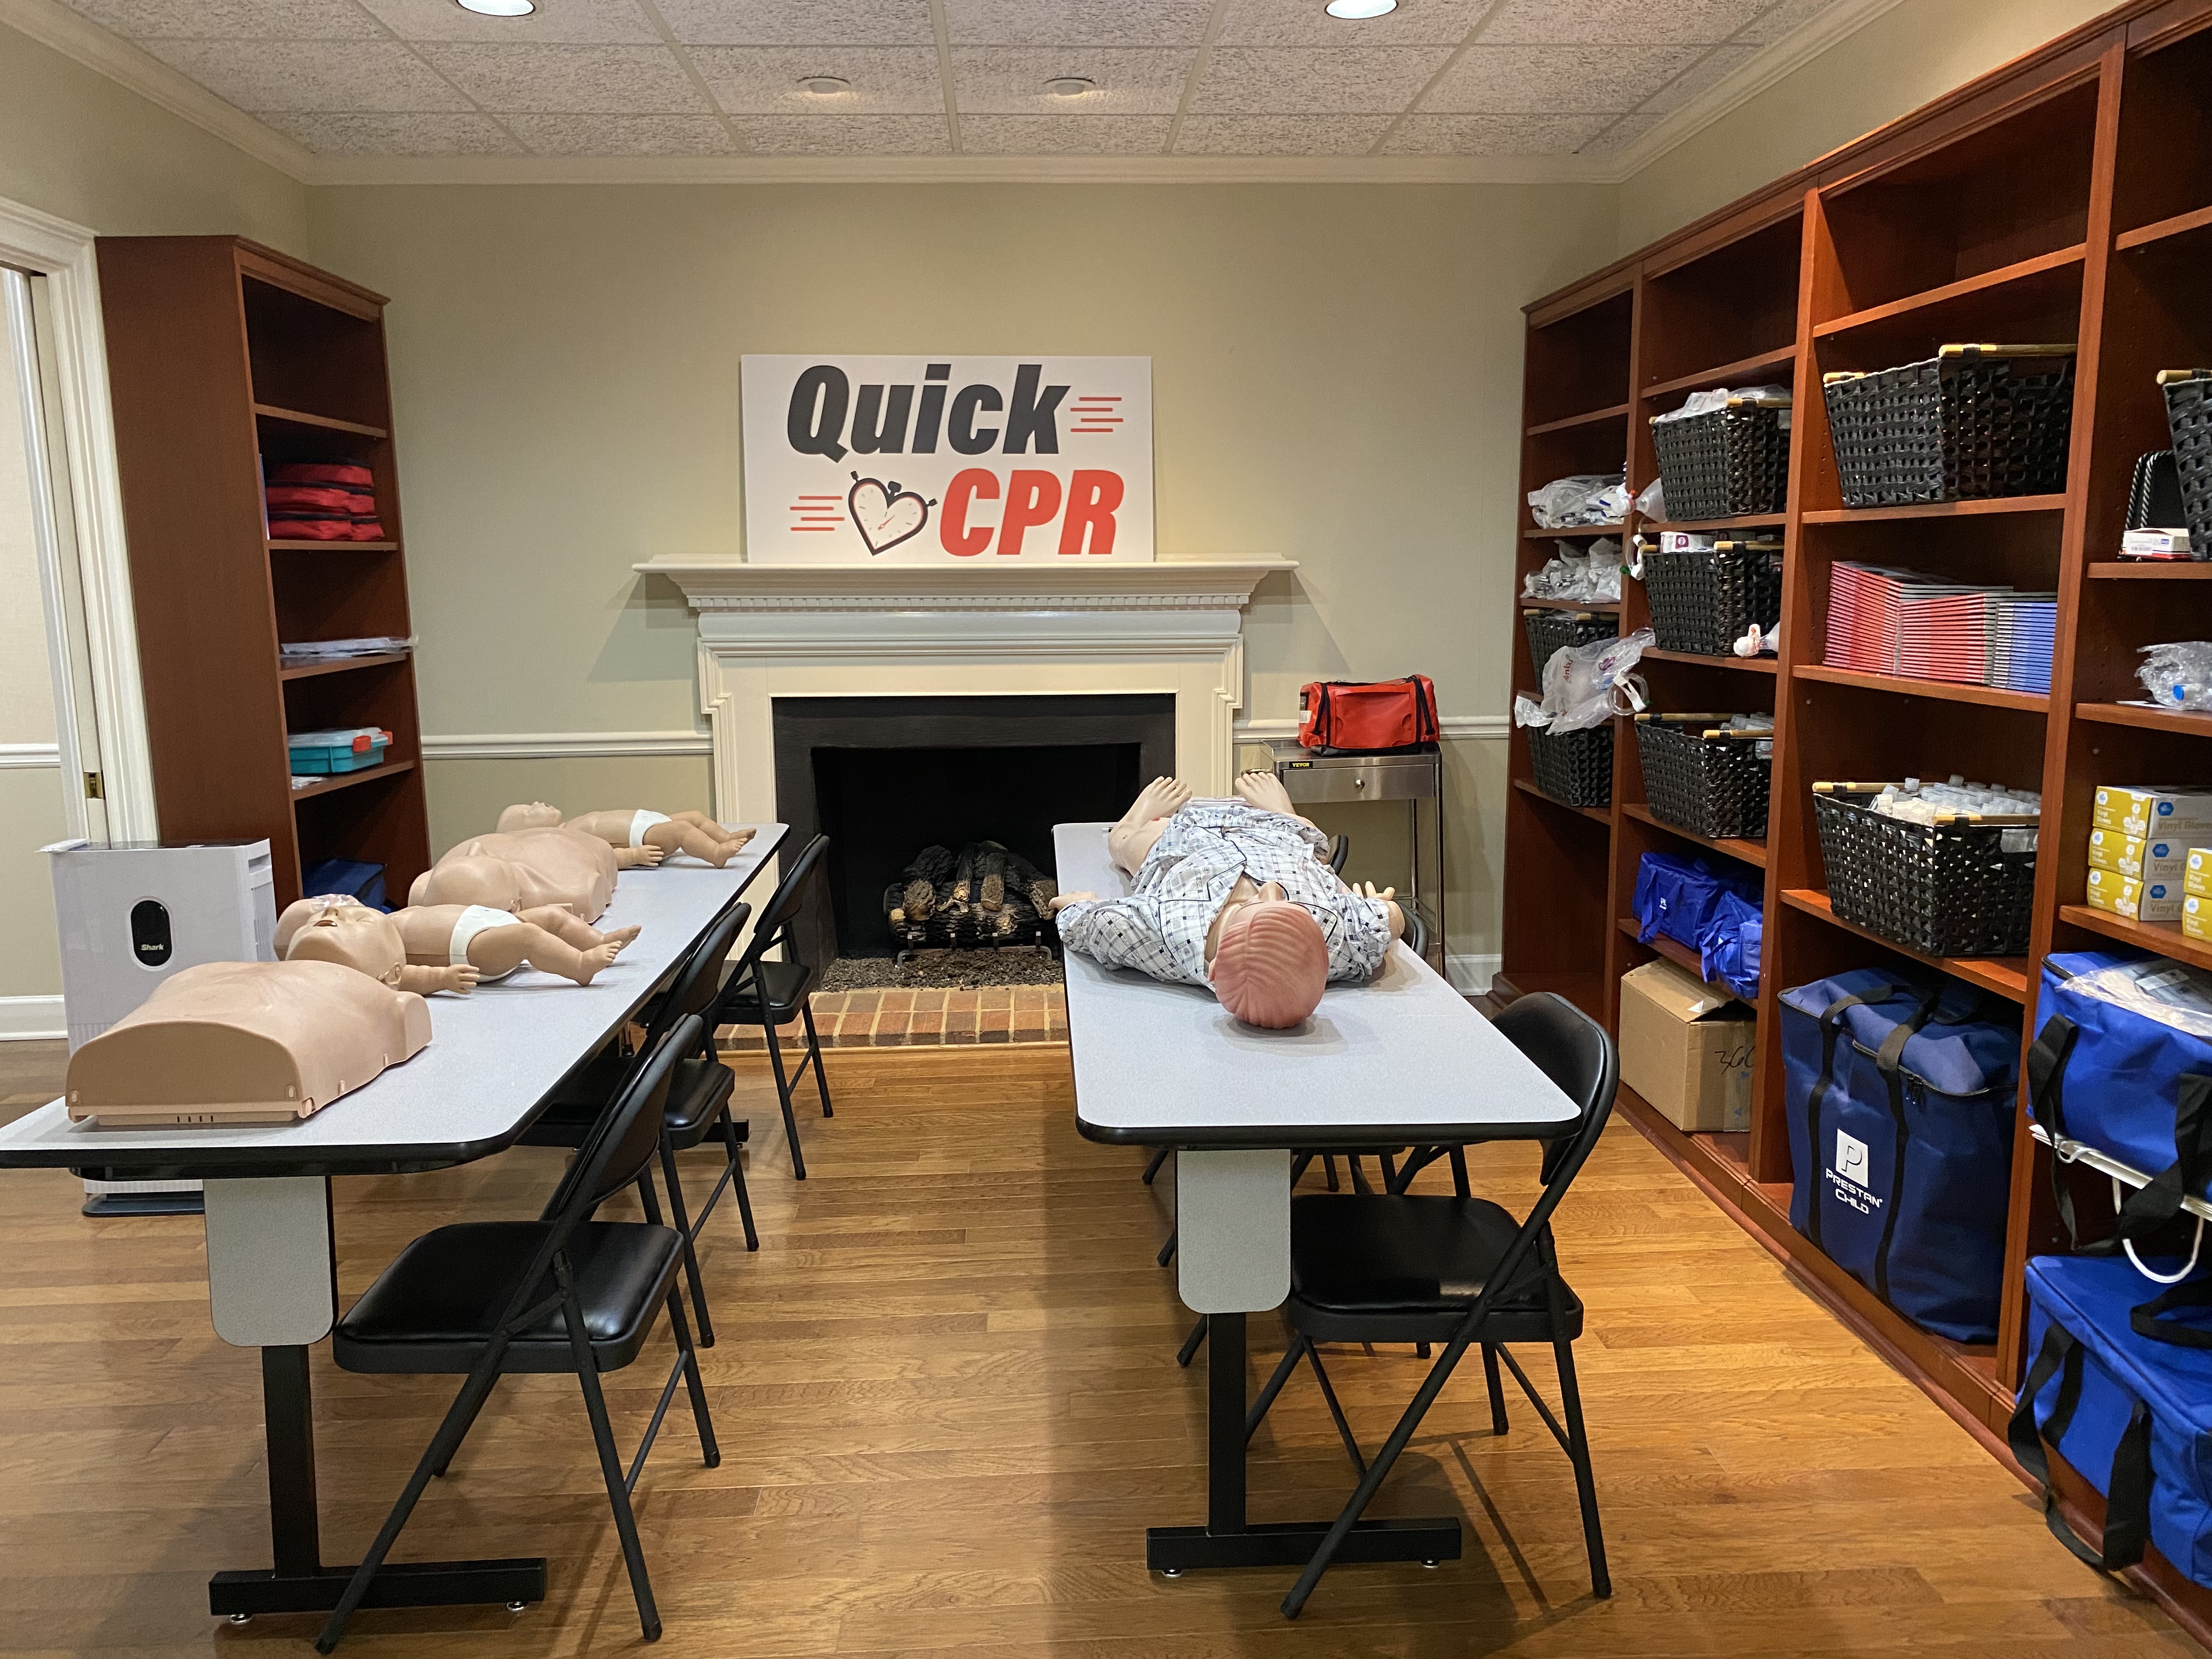 CPR/AED (NO CERTIFICATION)